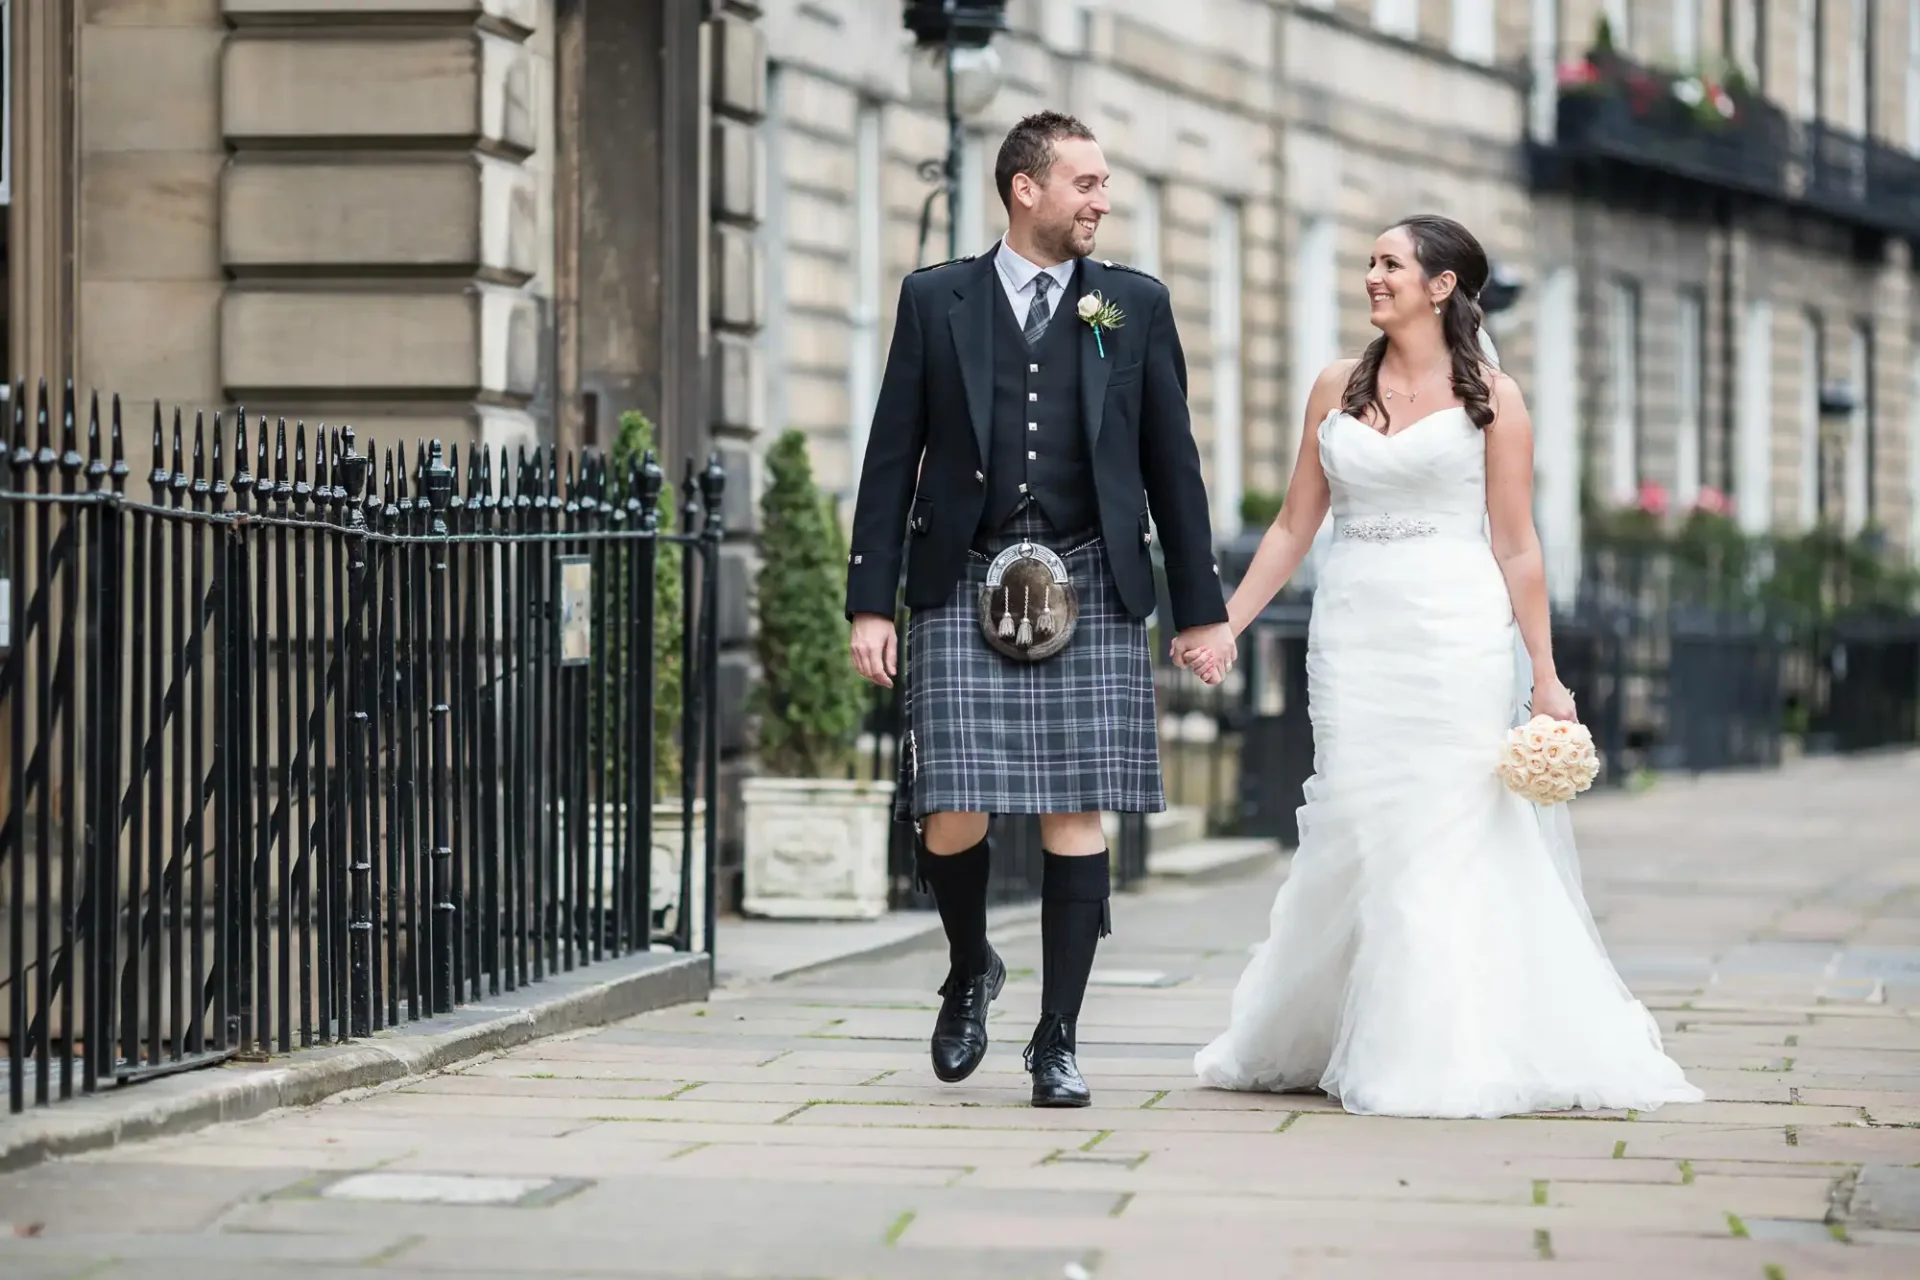 A newlywed couple smiling and walking down a city street, the groom wearing a kilt and the bride in a white gown.